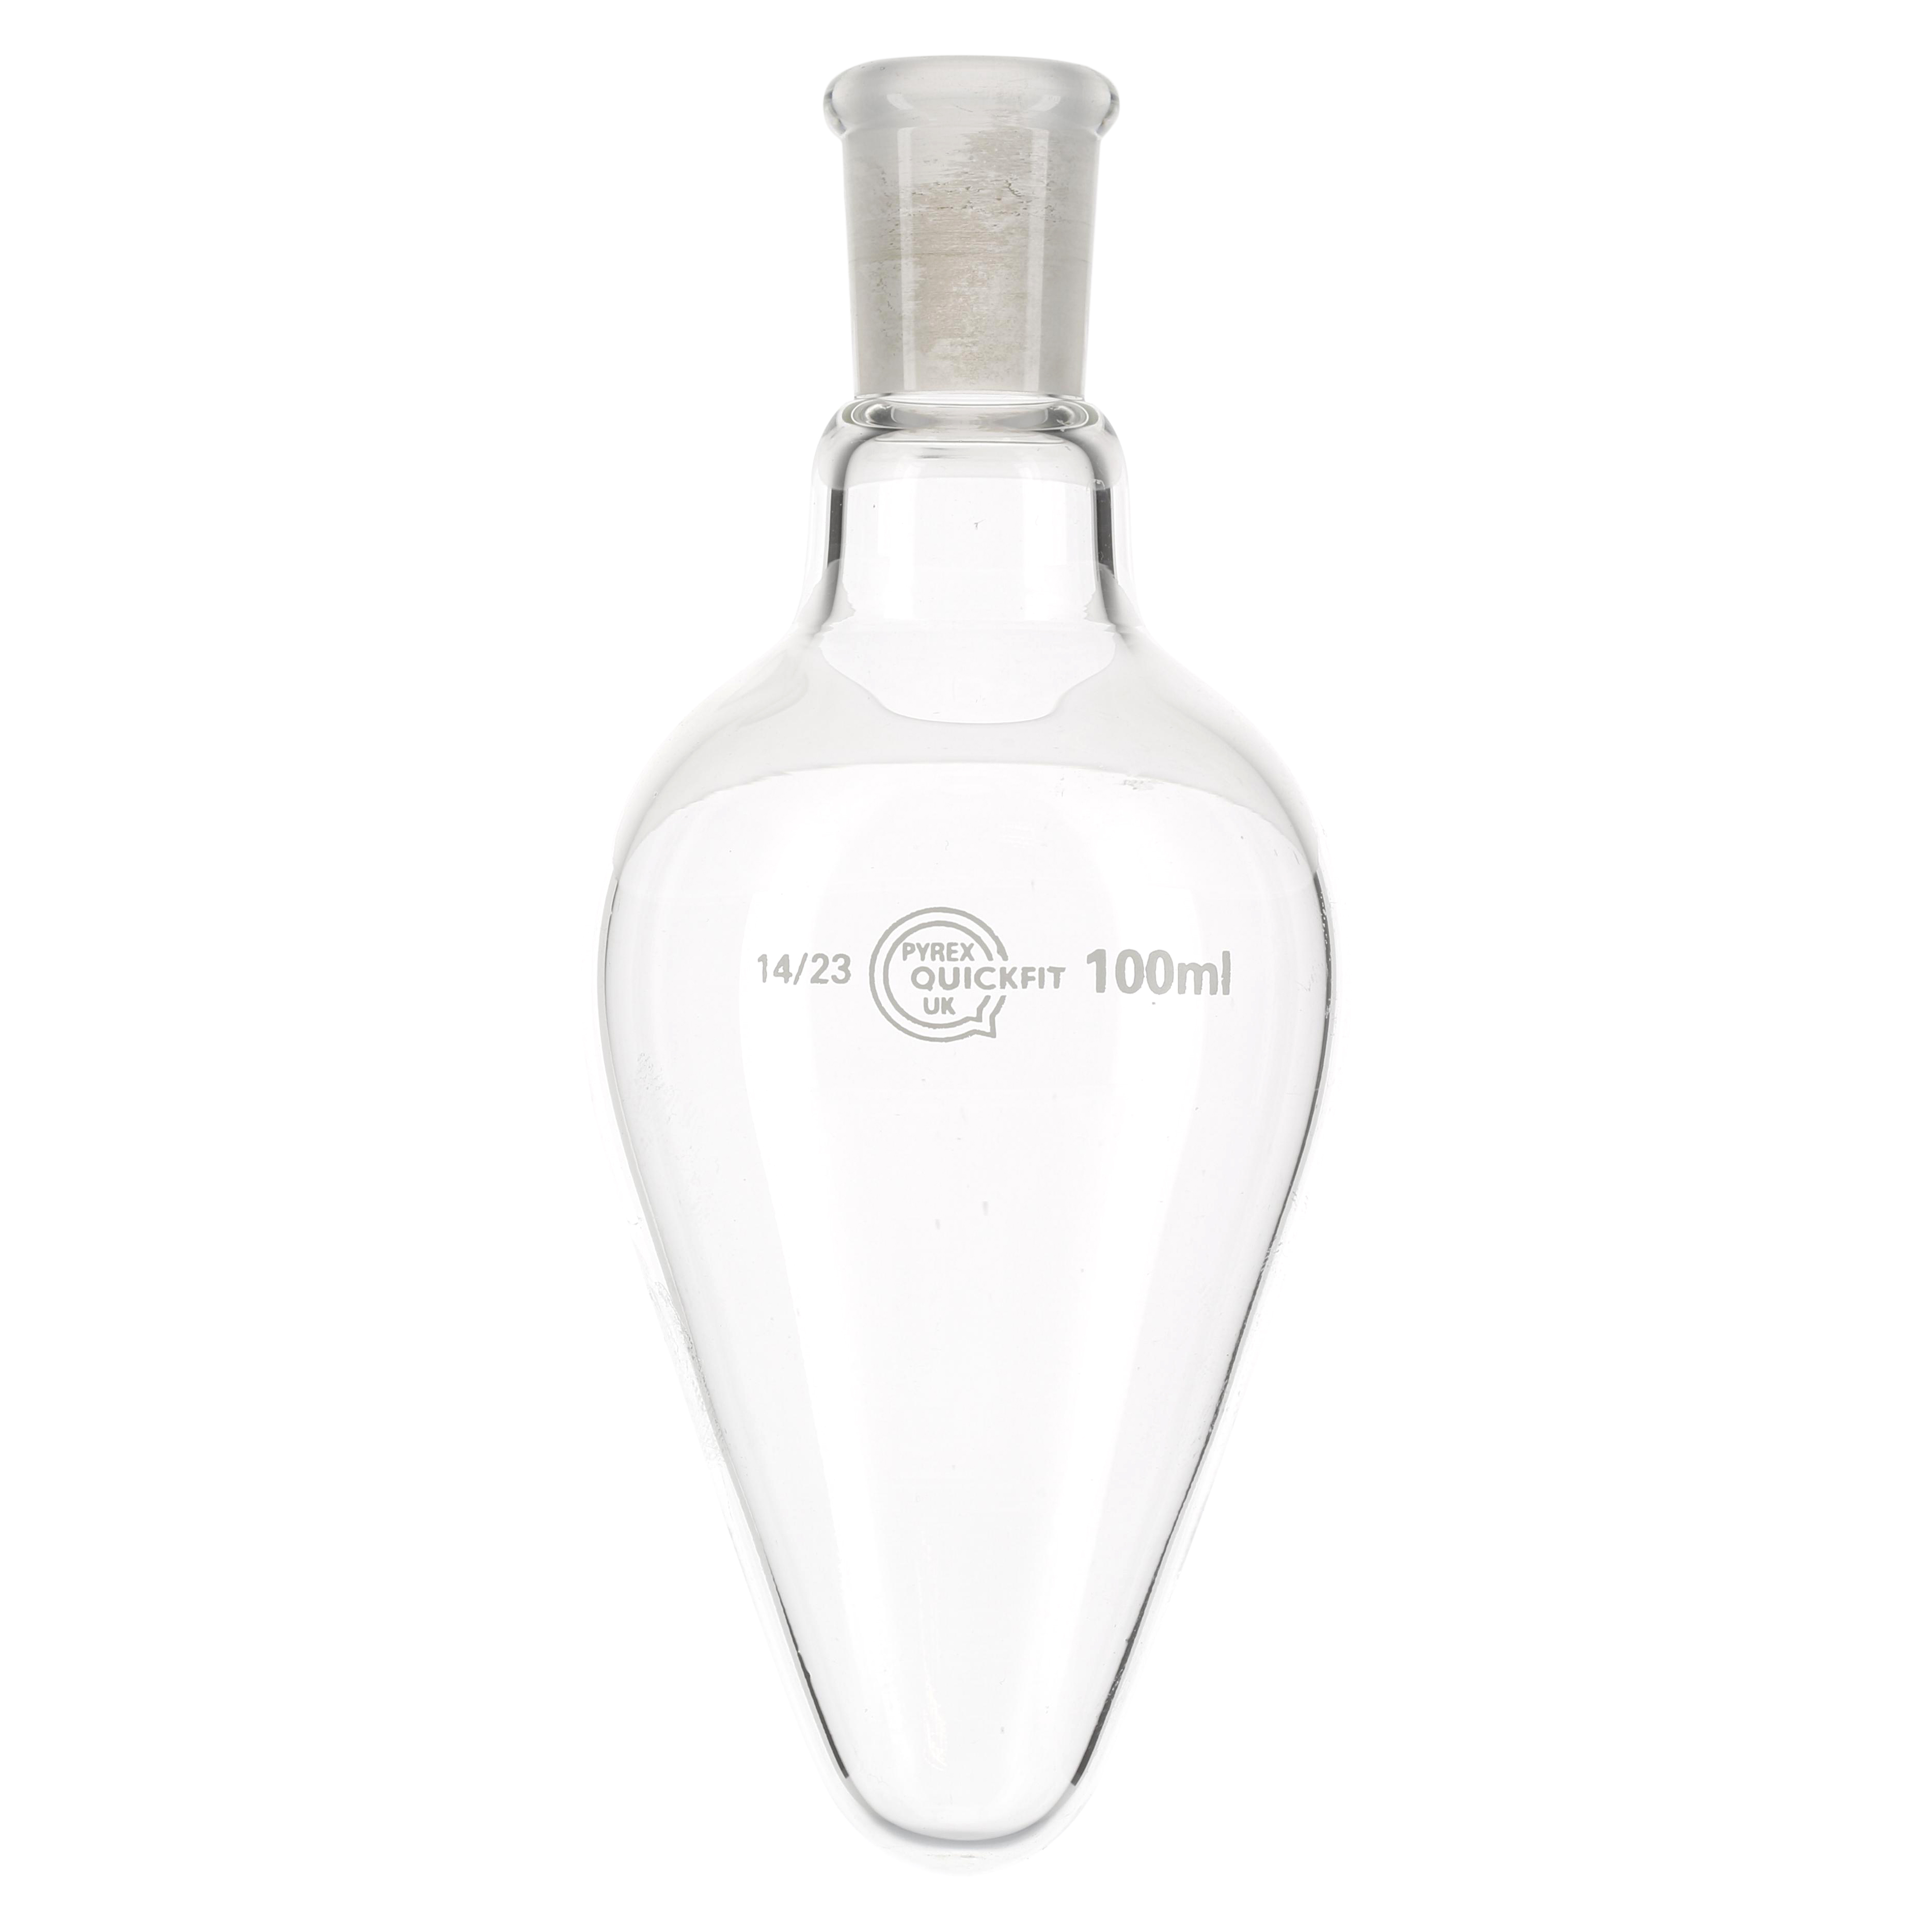 Quickfit Pear Shaped Flask - 100ml 14-23